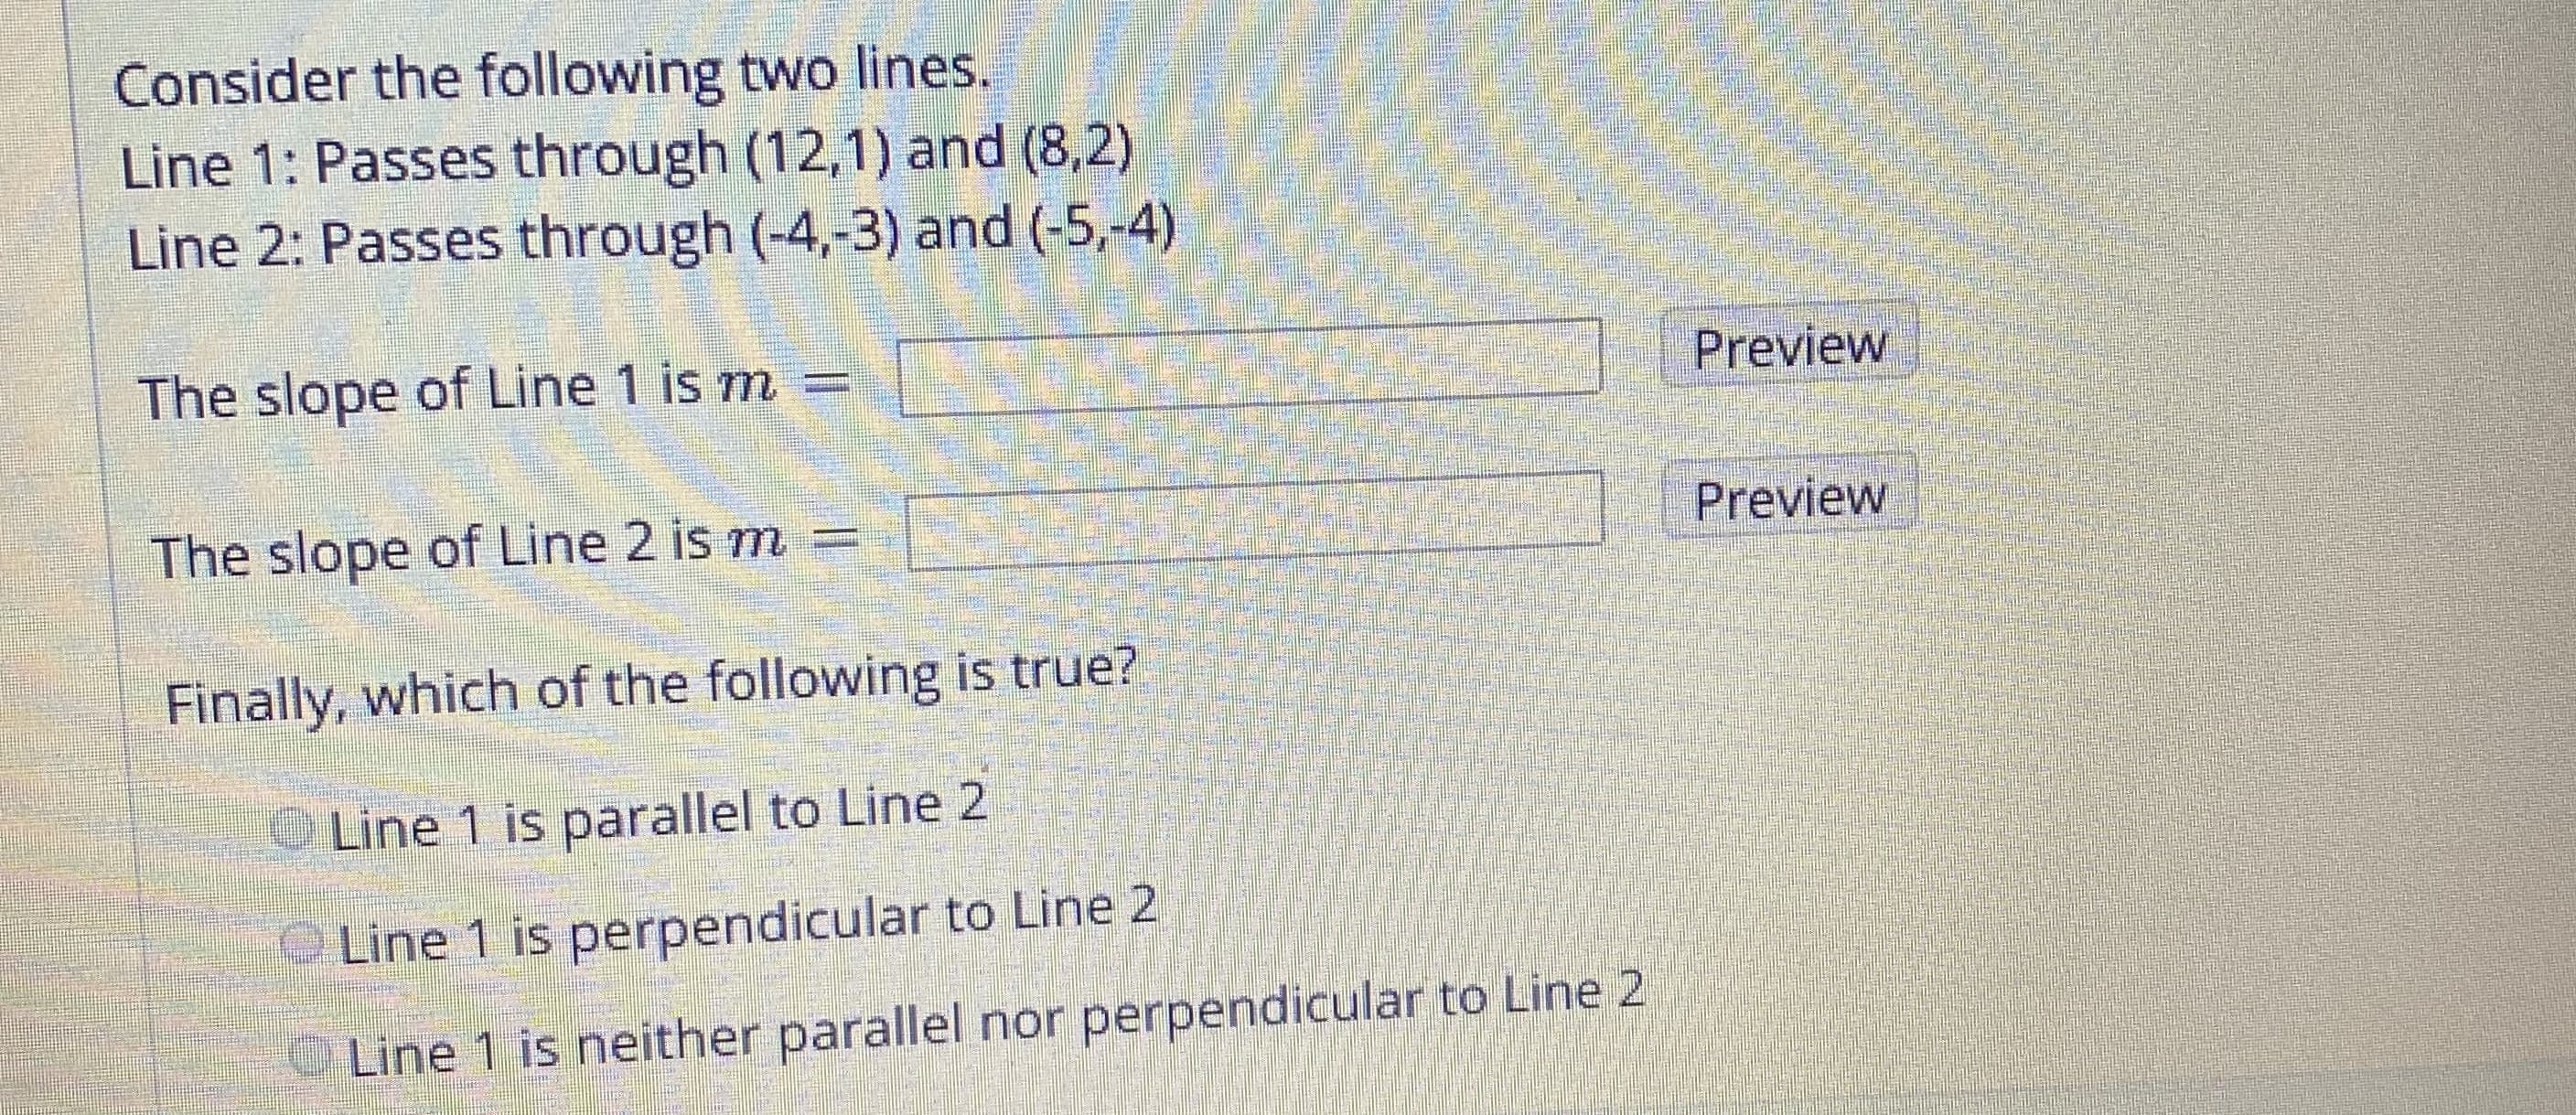 Consider the following two lines.
Line 1: Passes through (12,1) and (8,2)
Line 2: Passes through (-4,-3) and (-5,-4)
The slope of Line 1 is m
Preview
Preview
The slope of Line 2 is m
Finally, which of the following is true?
Line 1 is parallel to Line 2
Line 1 is perpendicular to Line 2
Line 1 is neither parallel nor perpendicular to Line 2
